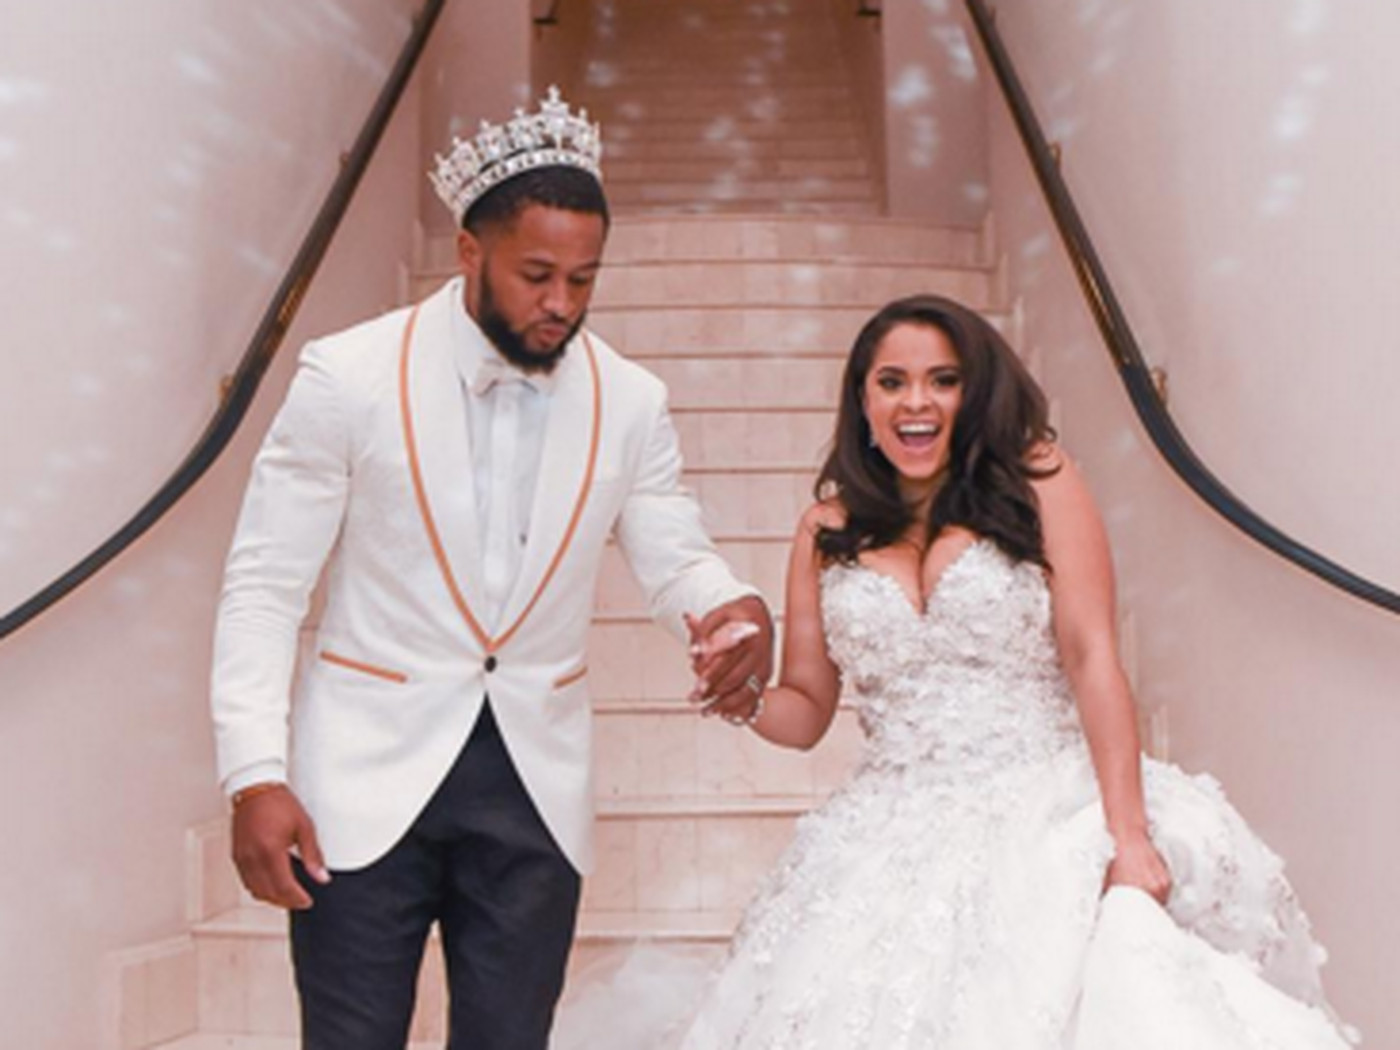 Earl Thomas wearing a white suit and Nina Heisser wearing a white weddng gown